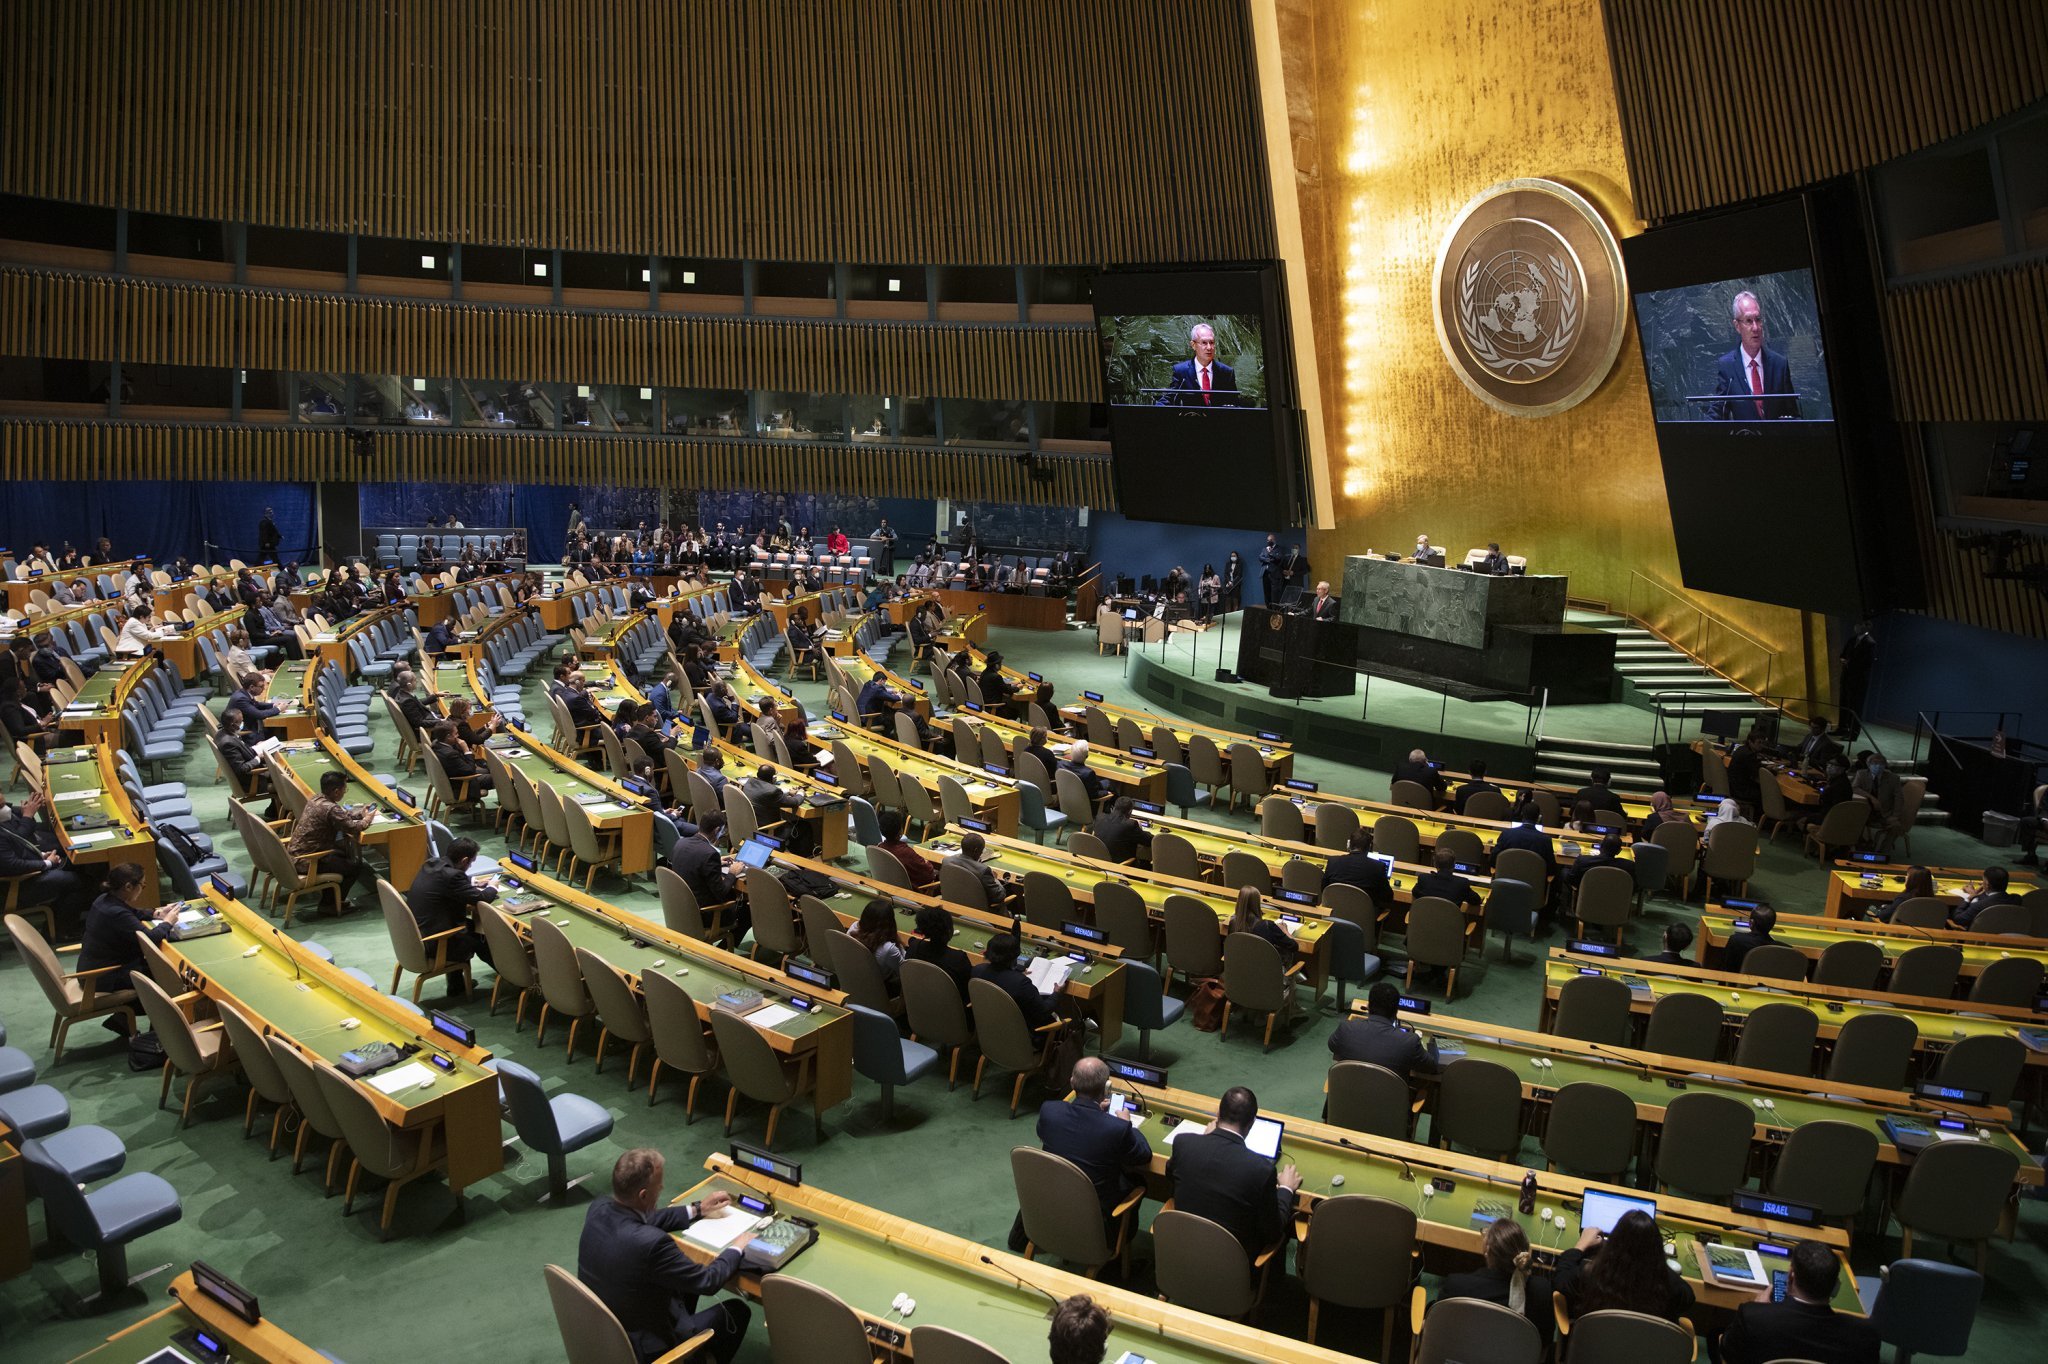 World Leaders Issue Dire Warnings on Climate and More at UN General Assembly